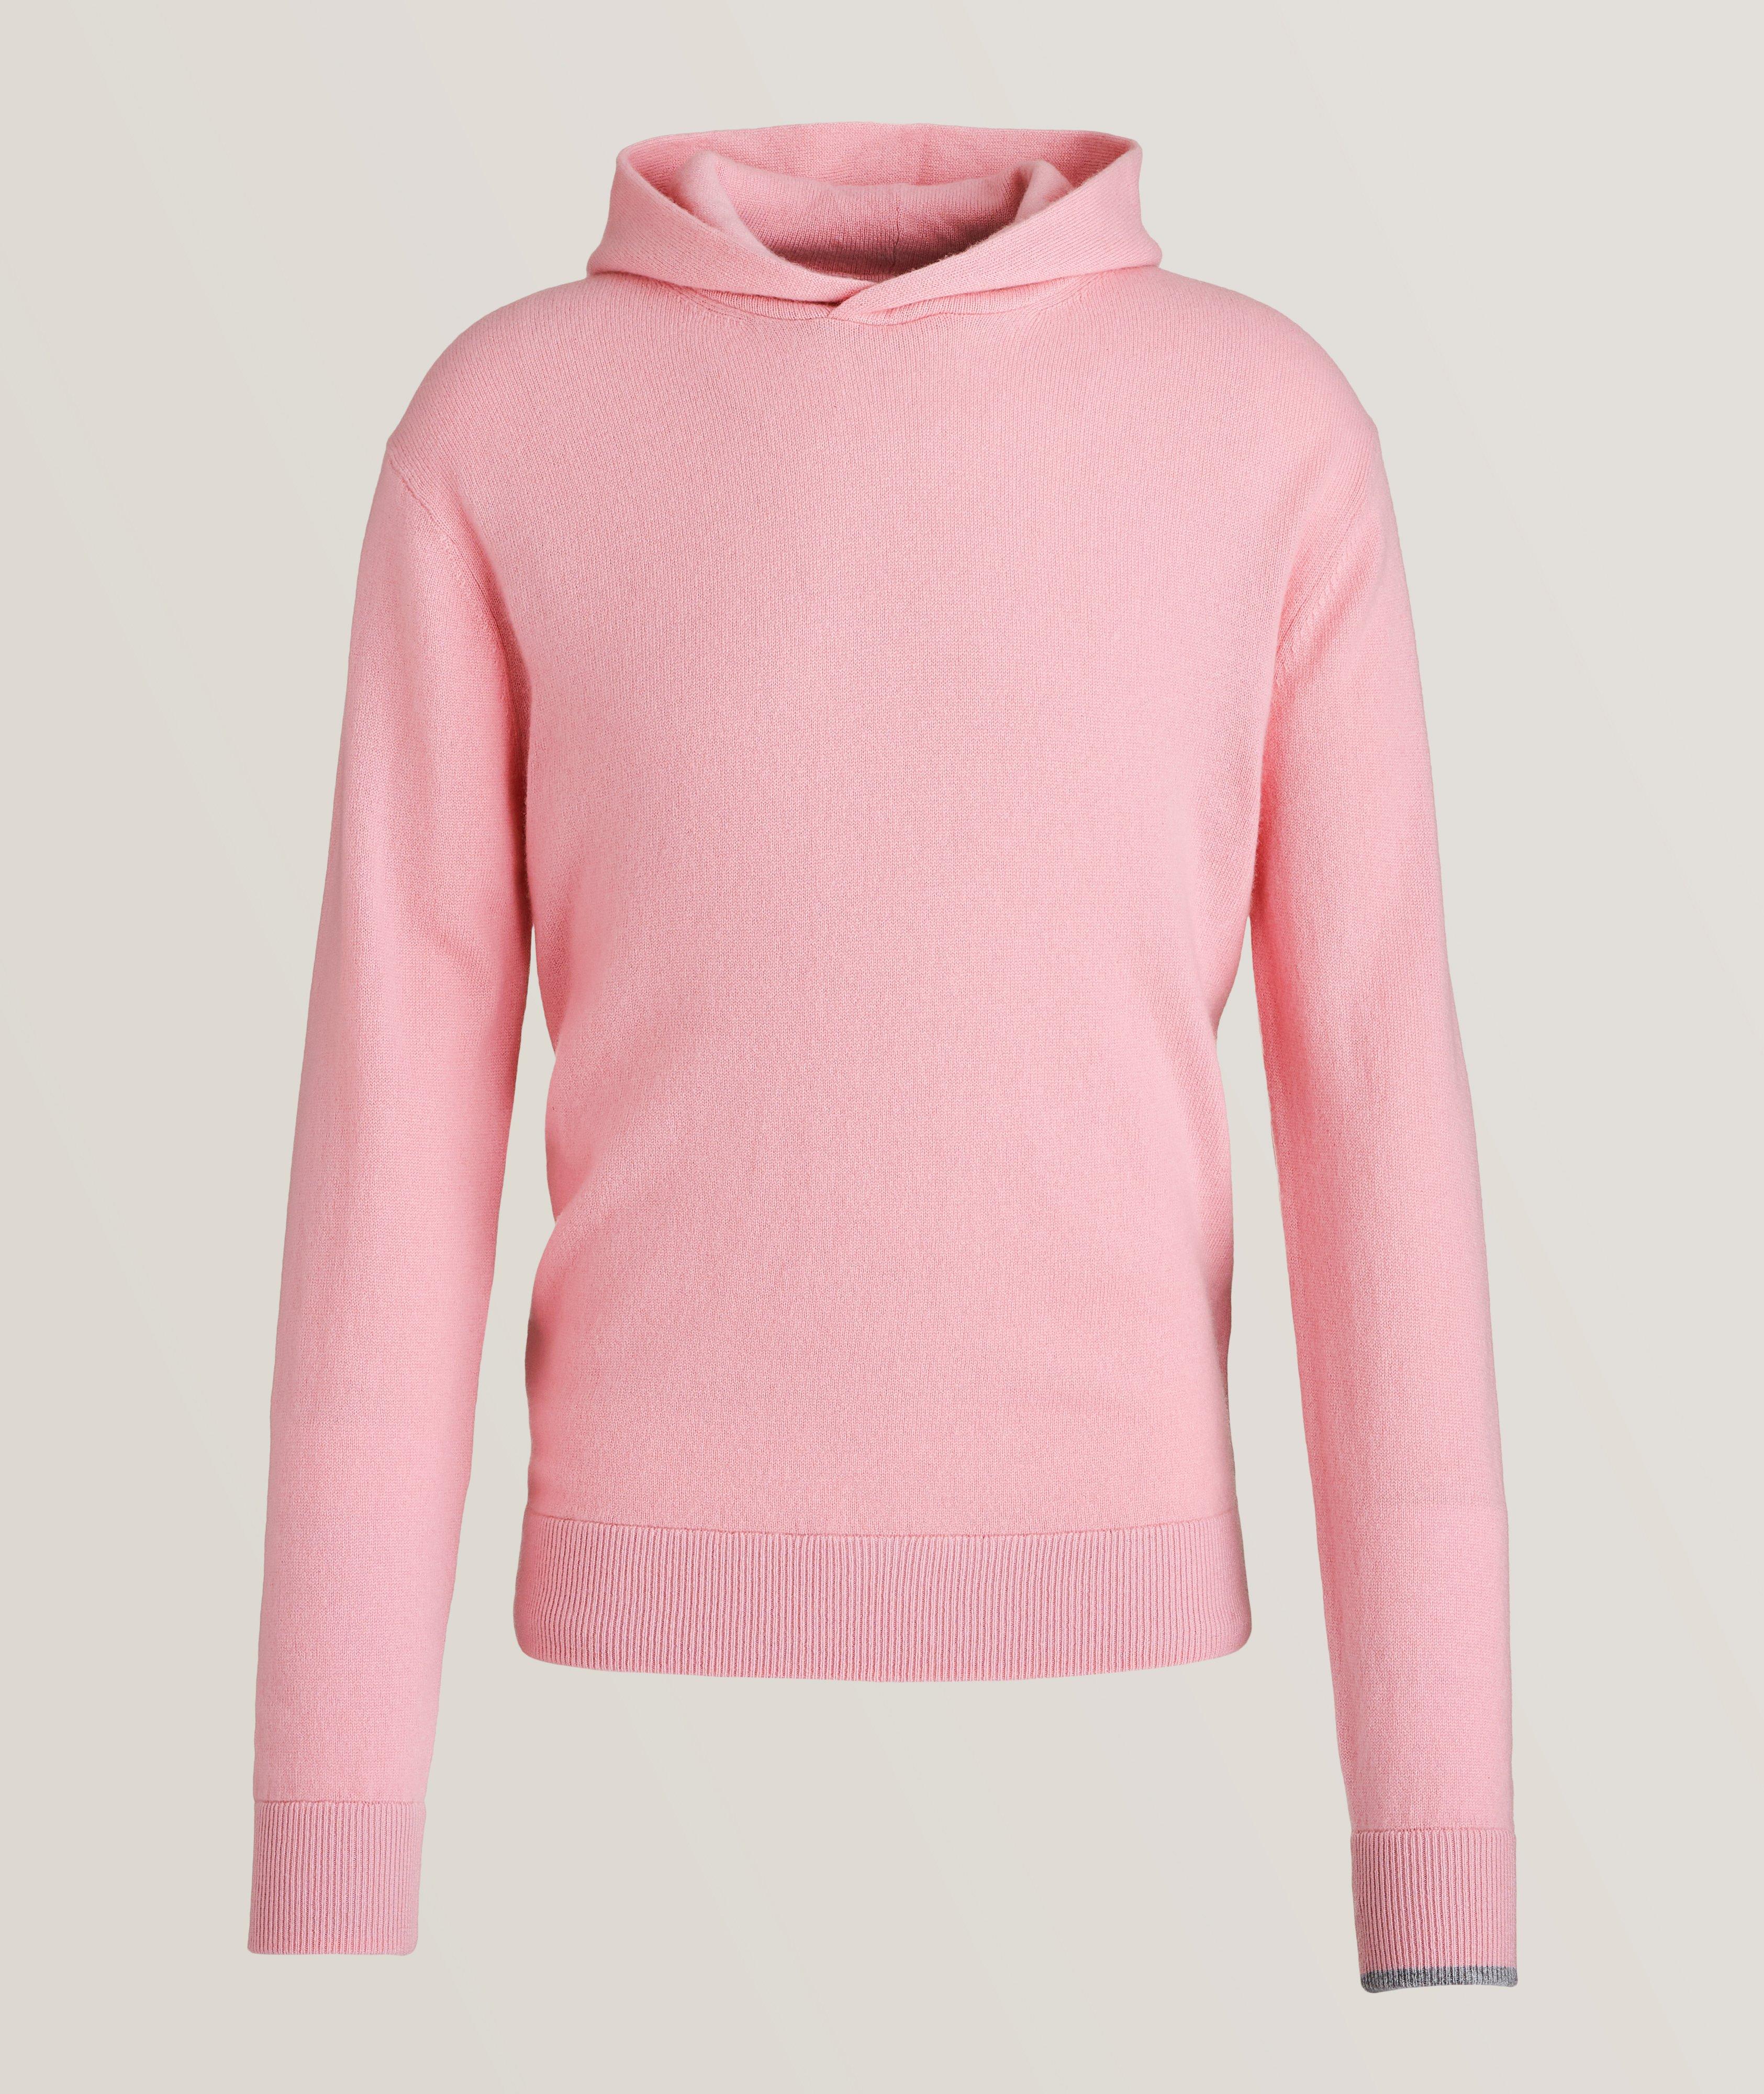 Greyson Wool-Cashmere Hooded Sweater | Sweaters & Knits | Final Cut